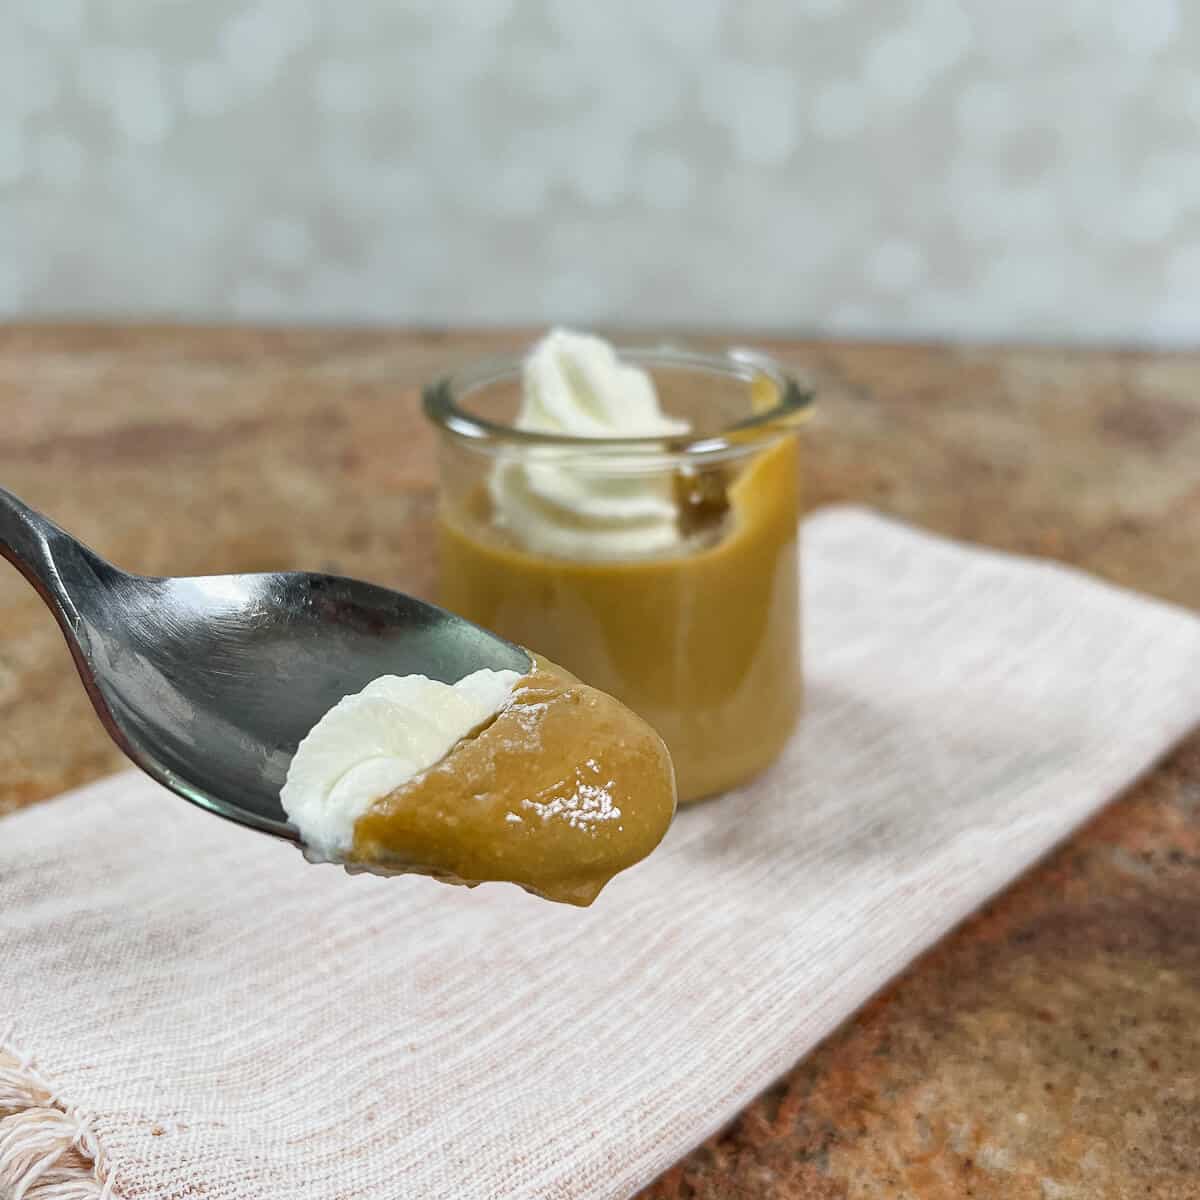 Spoonful of butterscotch pudding and whipped cream in front of the dish of pudding on a light brown napkin.